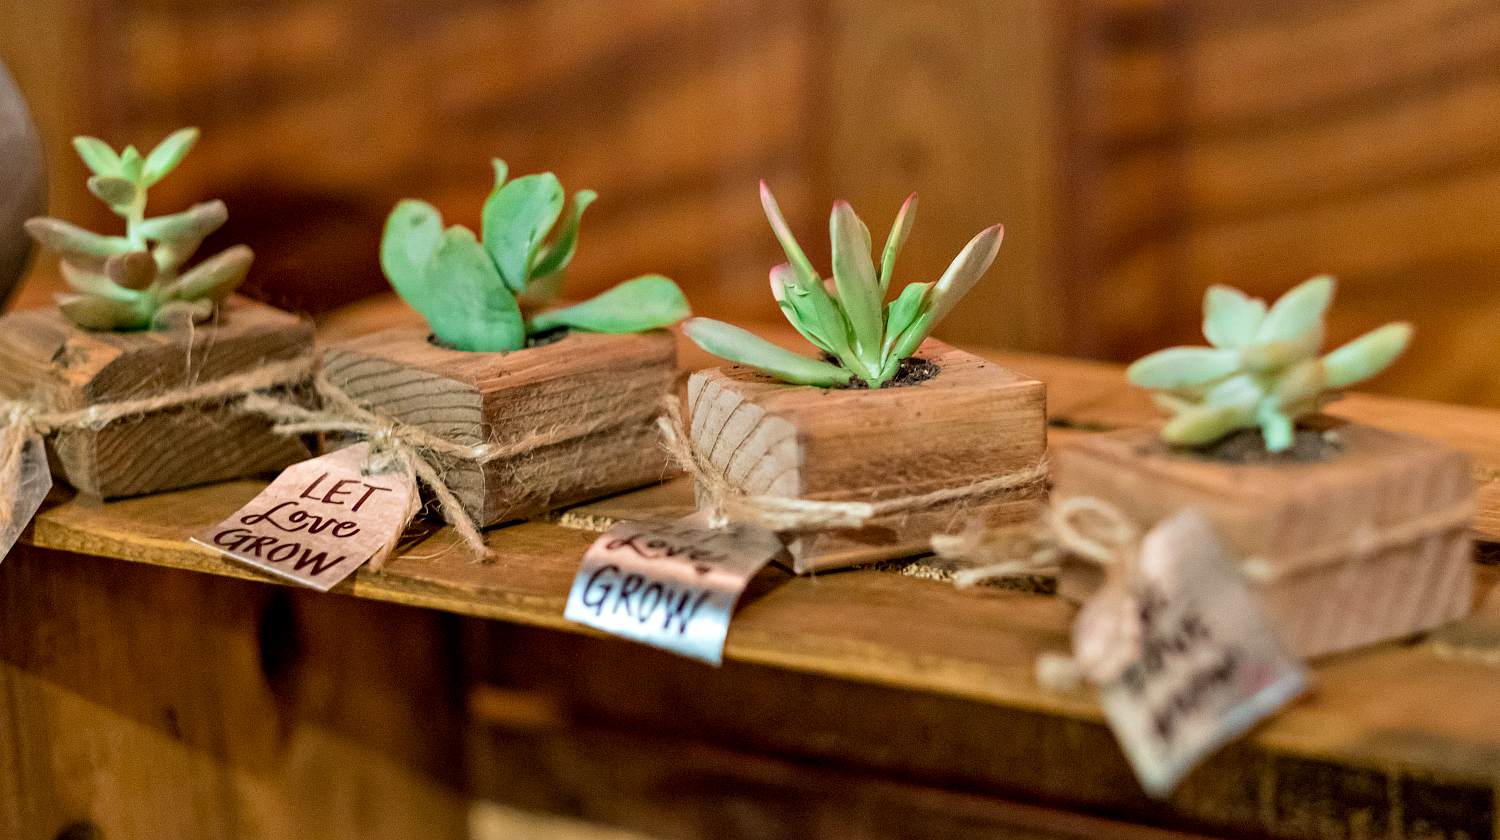 Feature | Lovely presents for wedding guests with succulent plants | DIY Wedding Favor Ideas Guests Will Keep For Sure